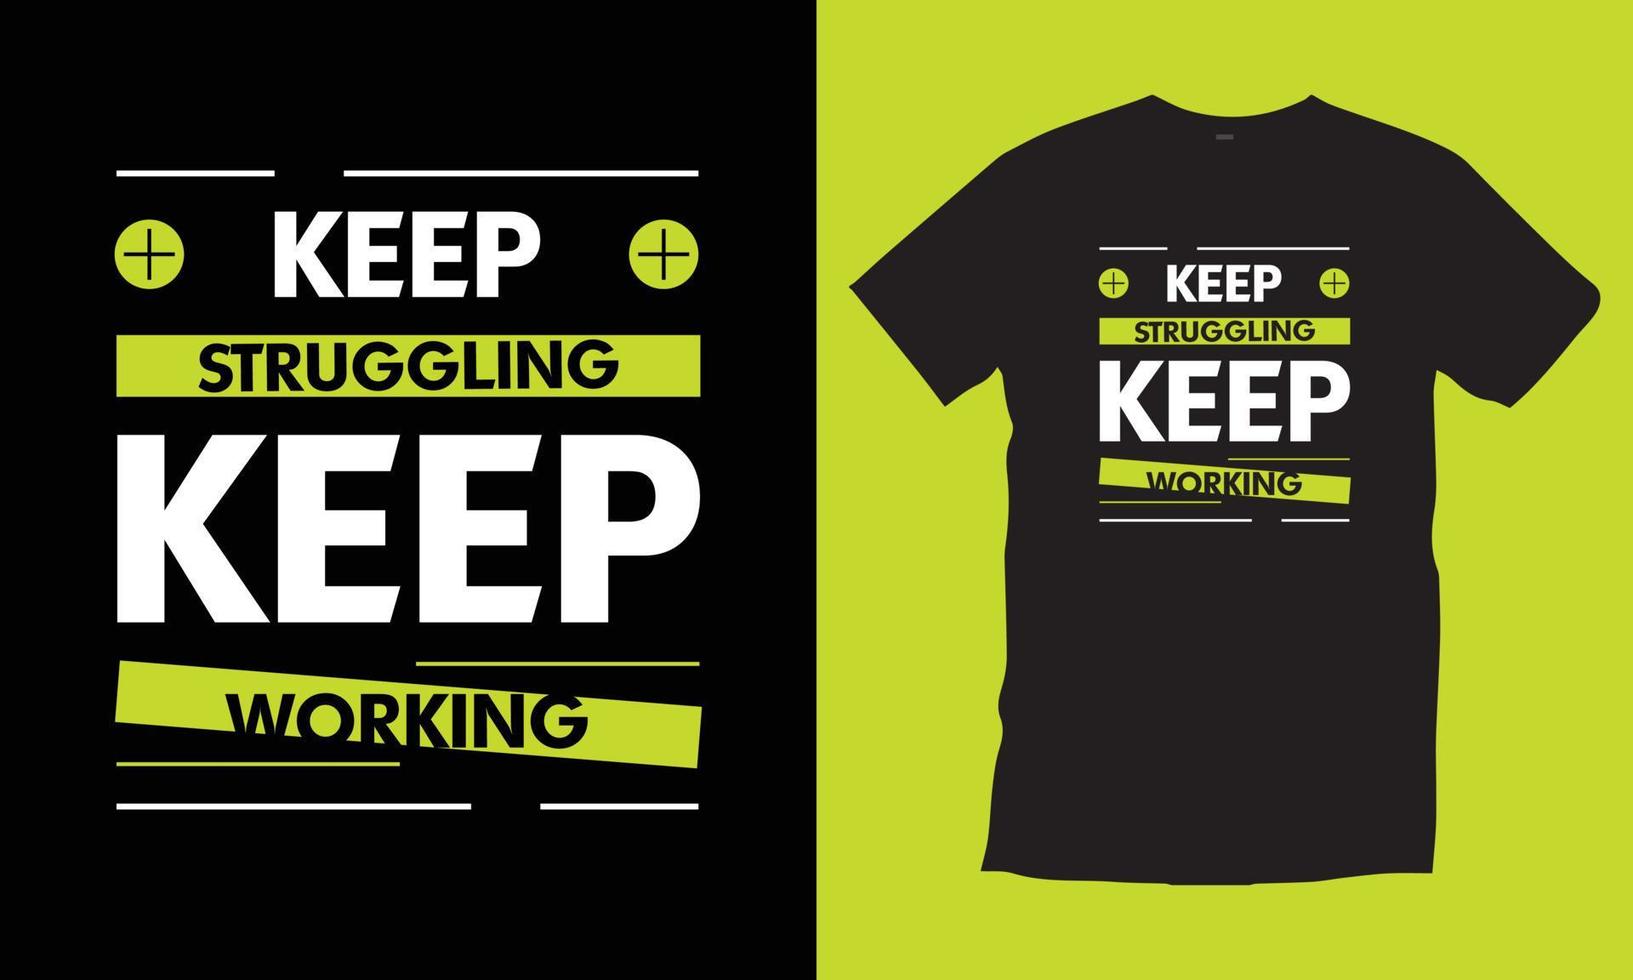 Keep struggling keep working. Motivational inspirational modern quotes cool typography black t shirt design vector for print.